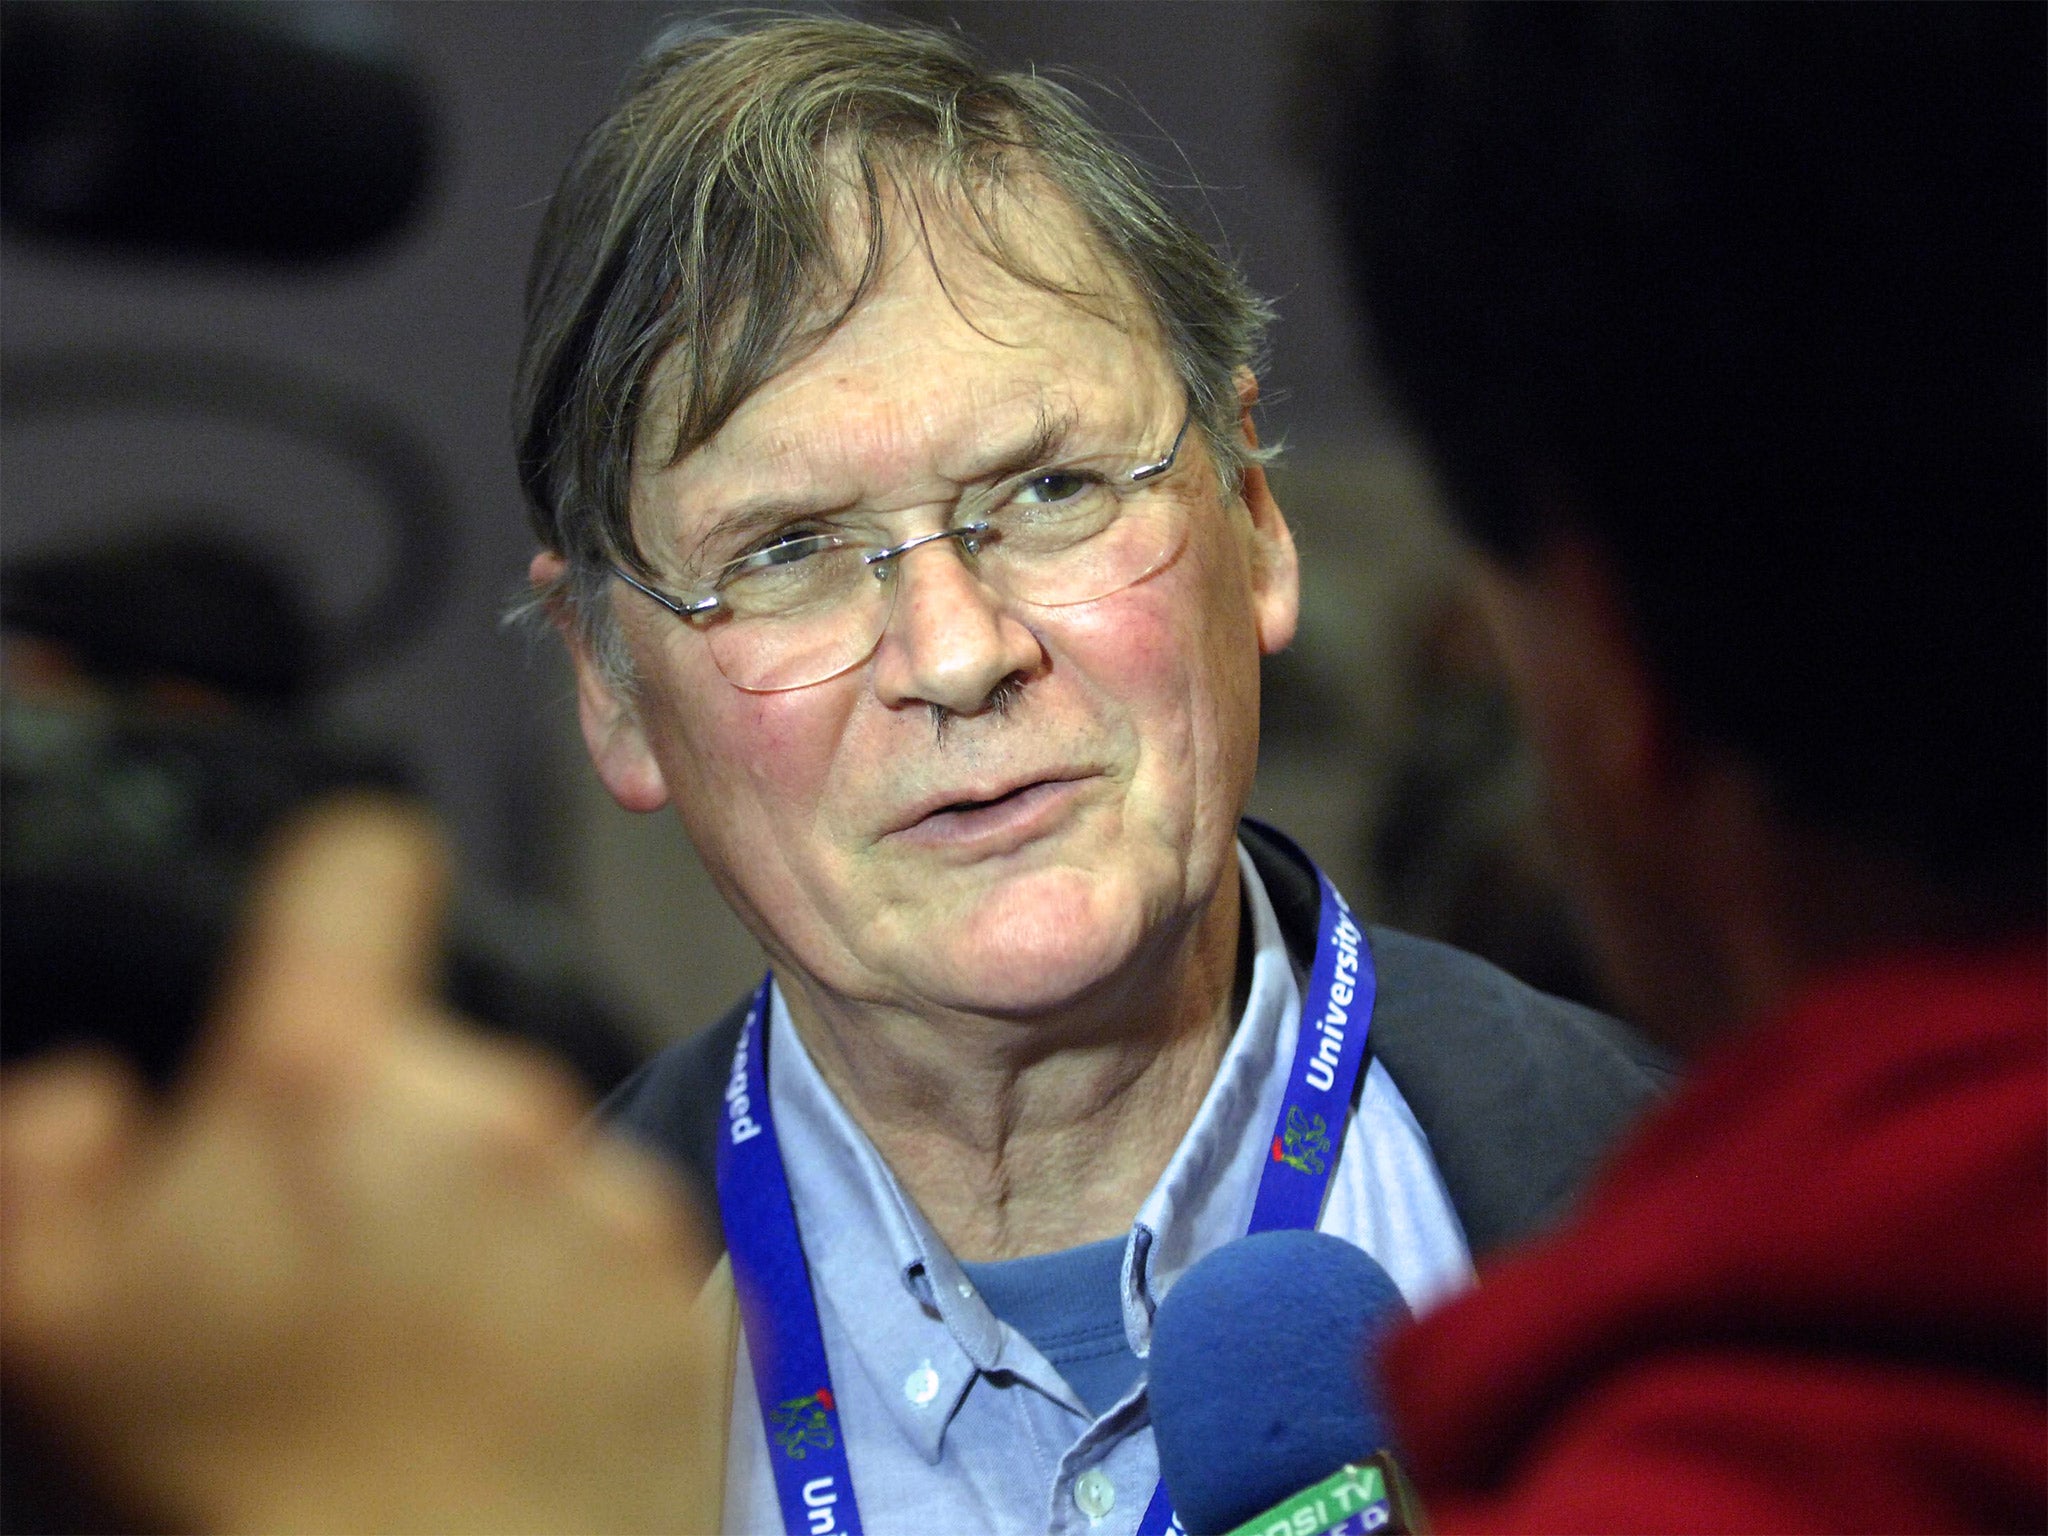 Tim Hunt has set back the cause of women in science